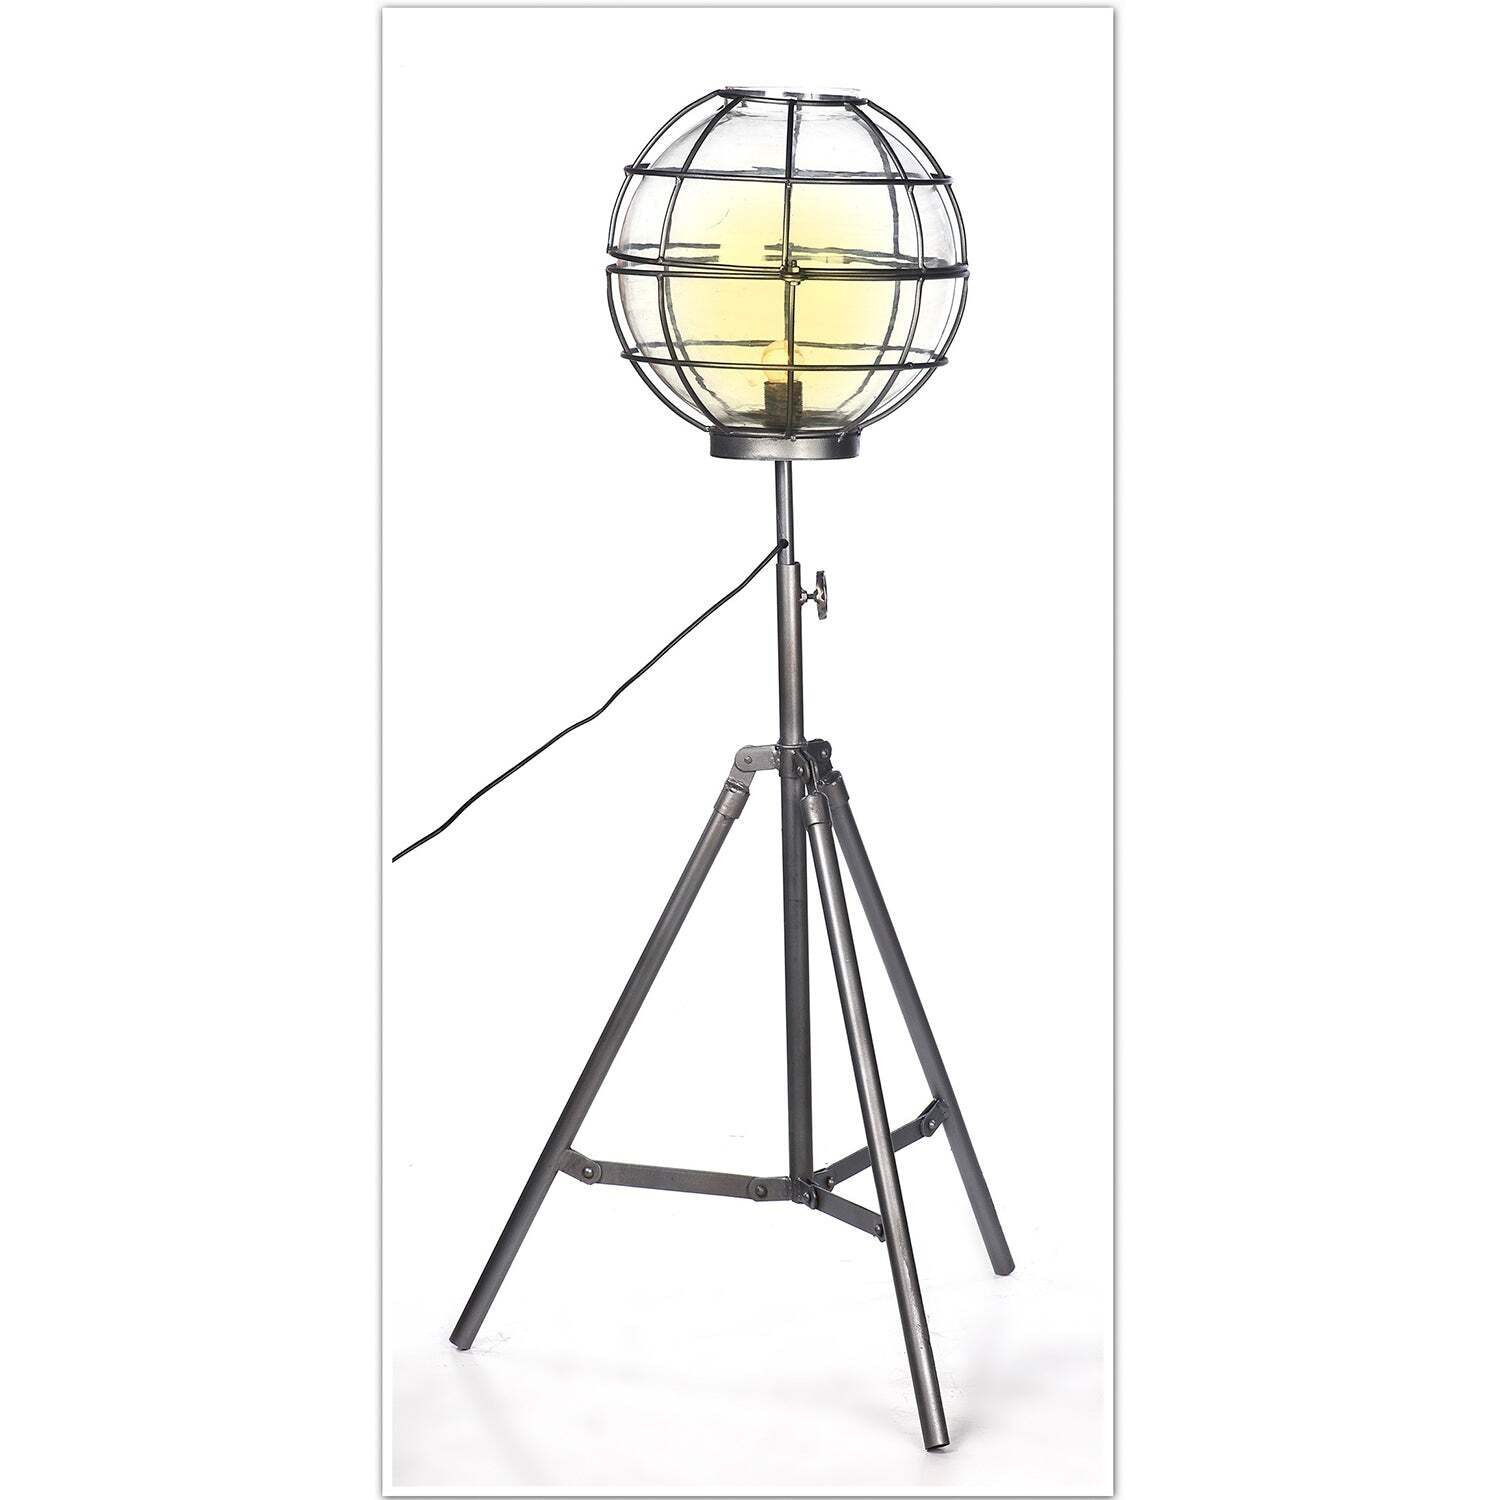 Upcycled Floor Lamp With Round Glass Cage - image 1